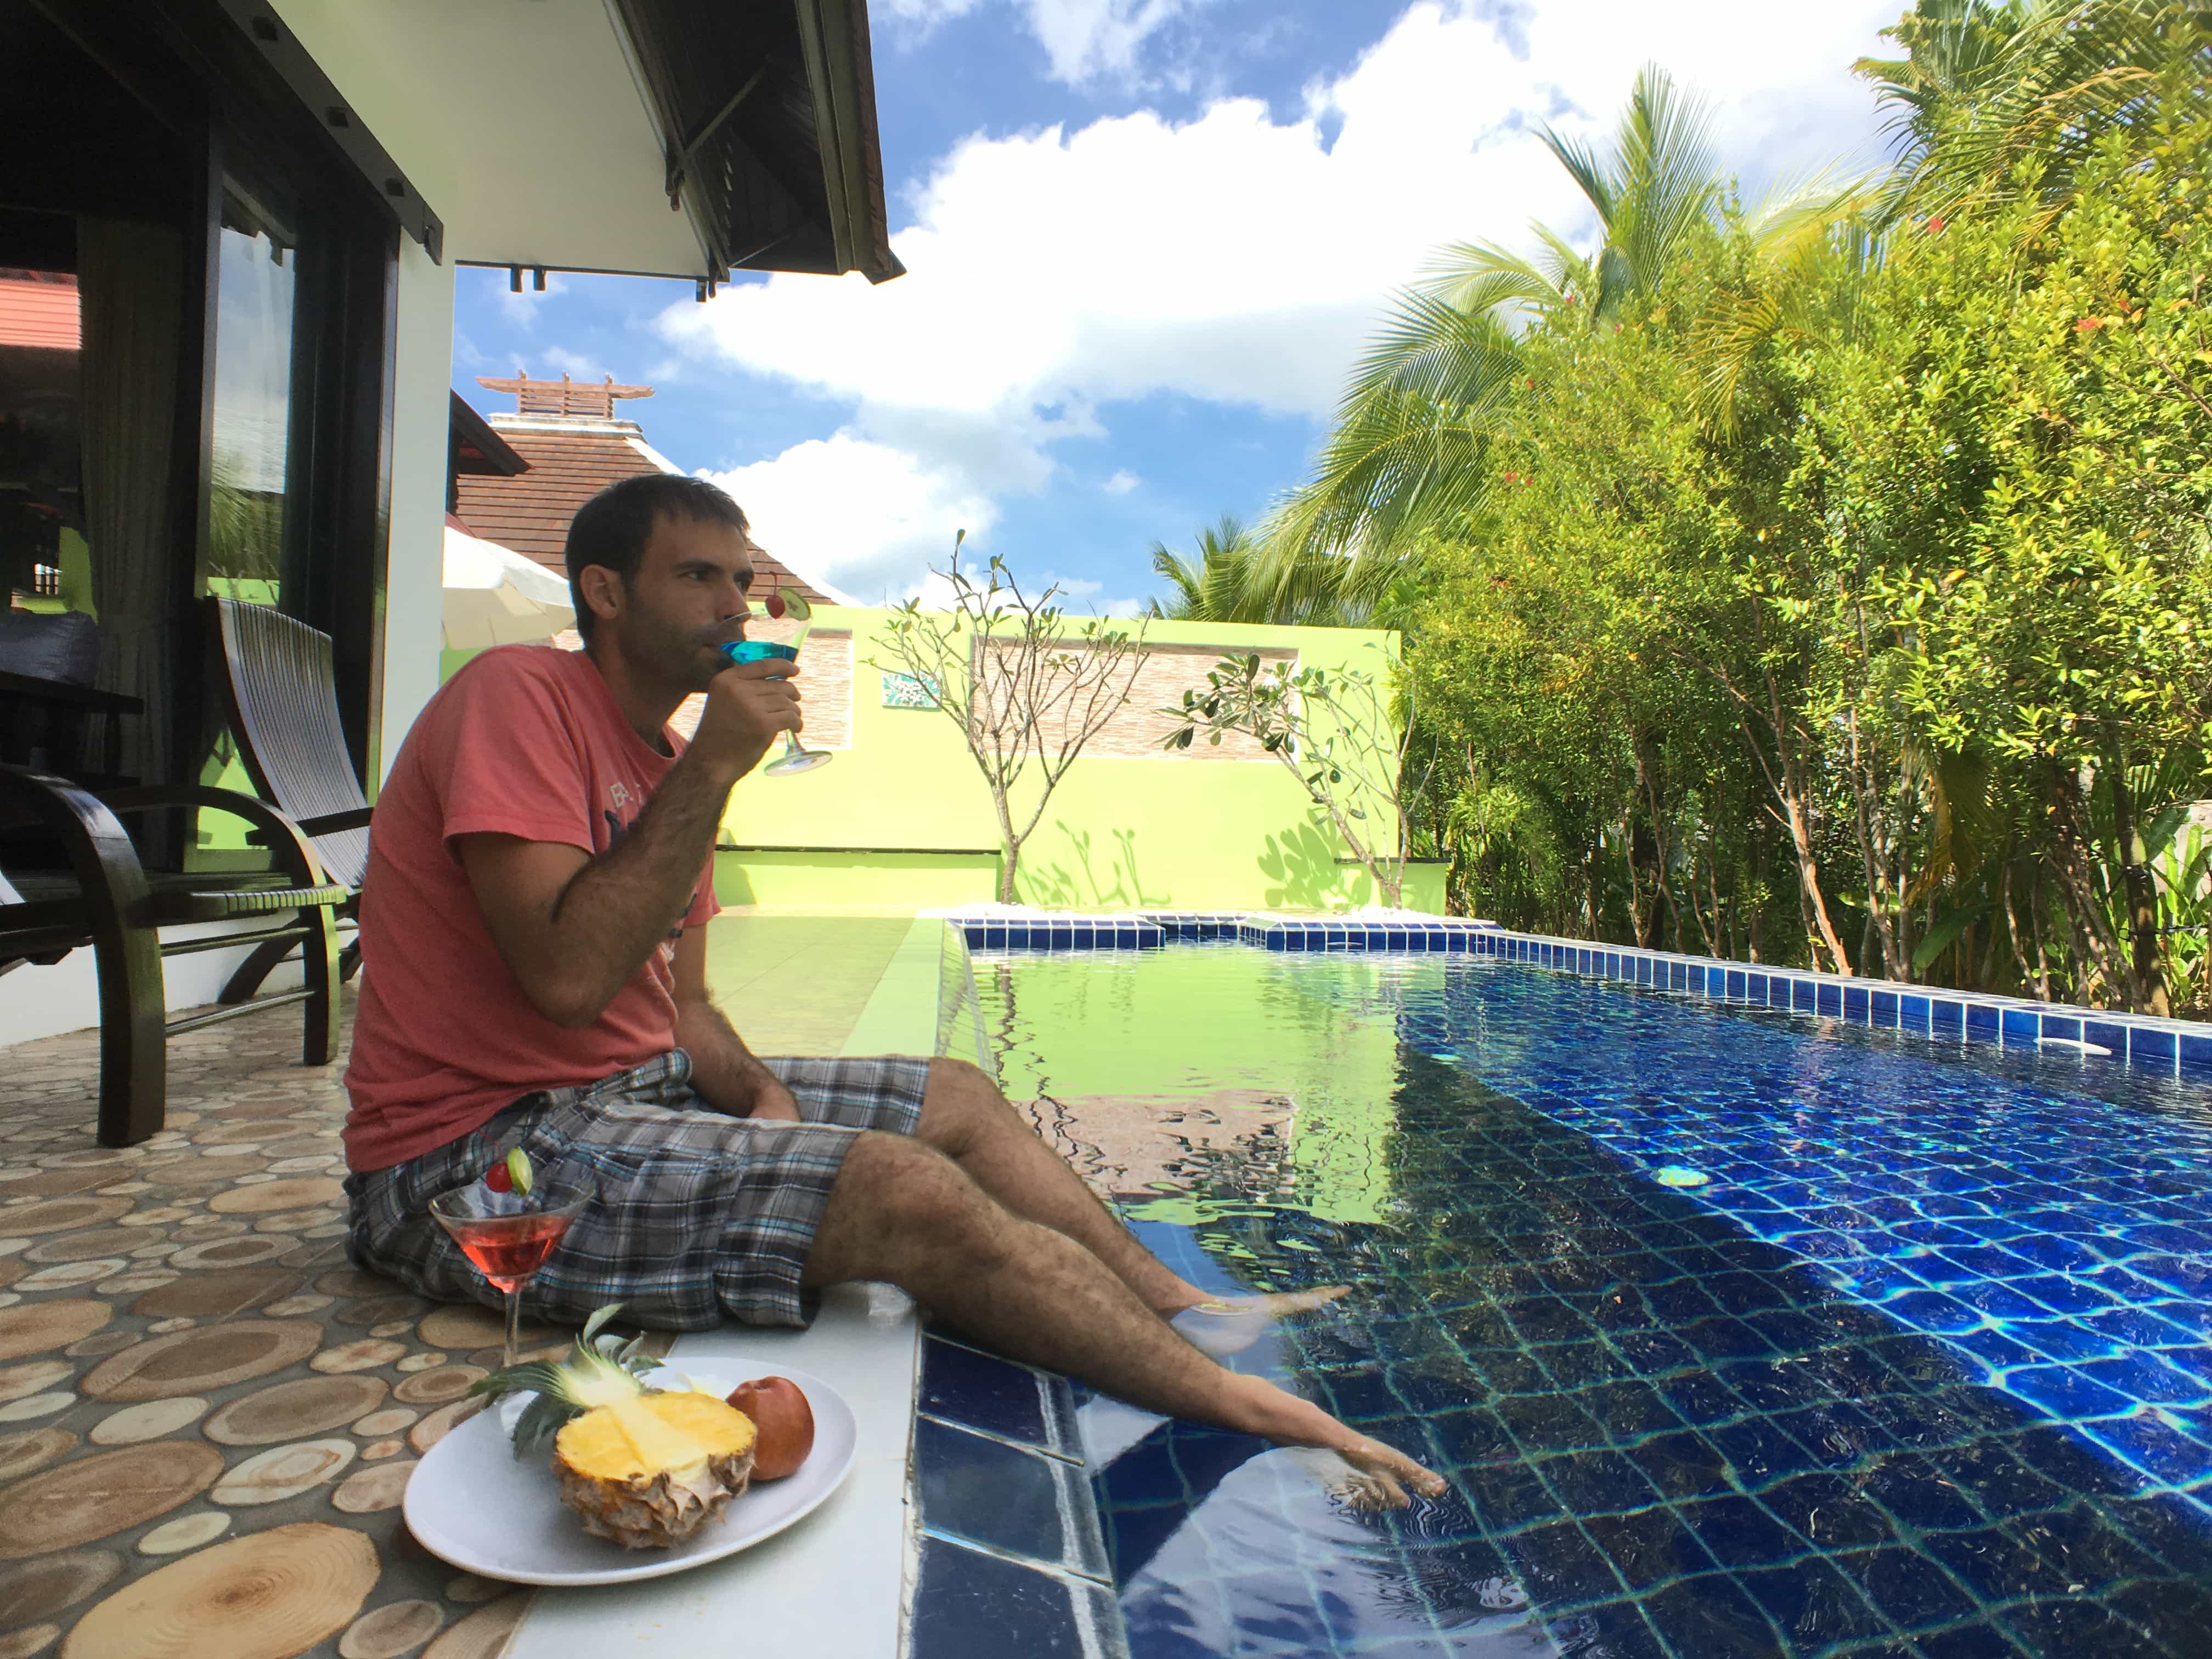 Enjoying our private villa in a luxury vacation in Thailand